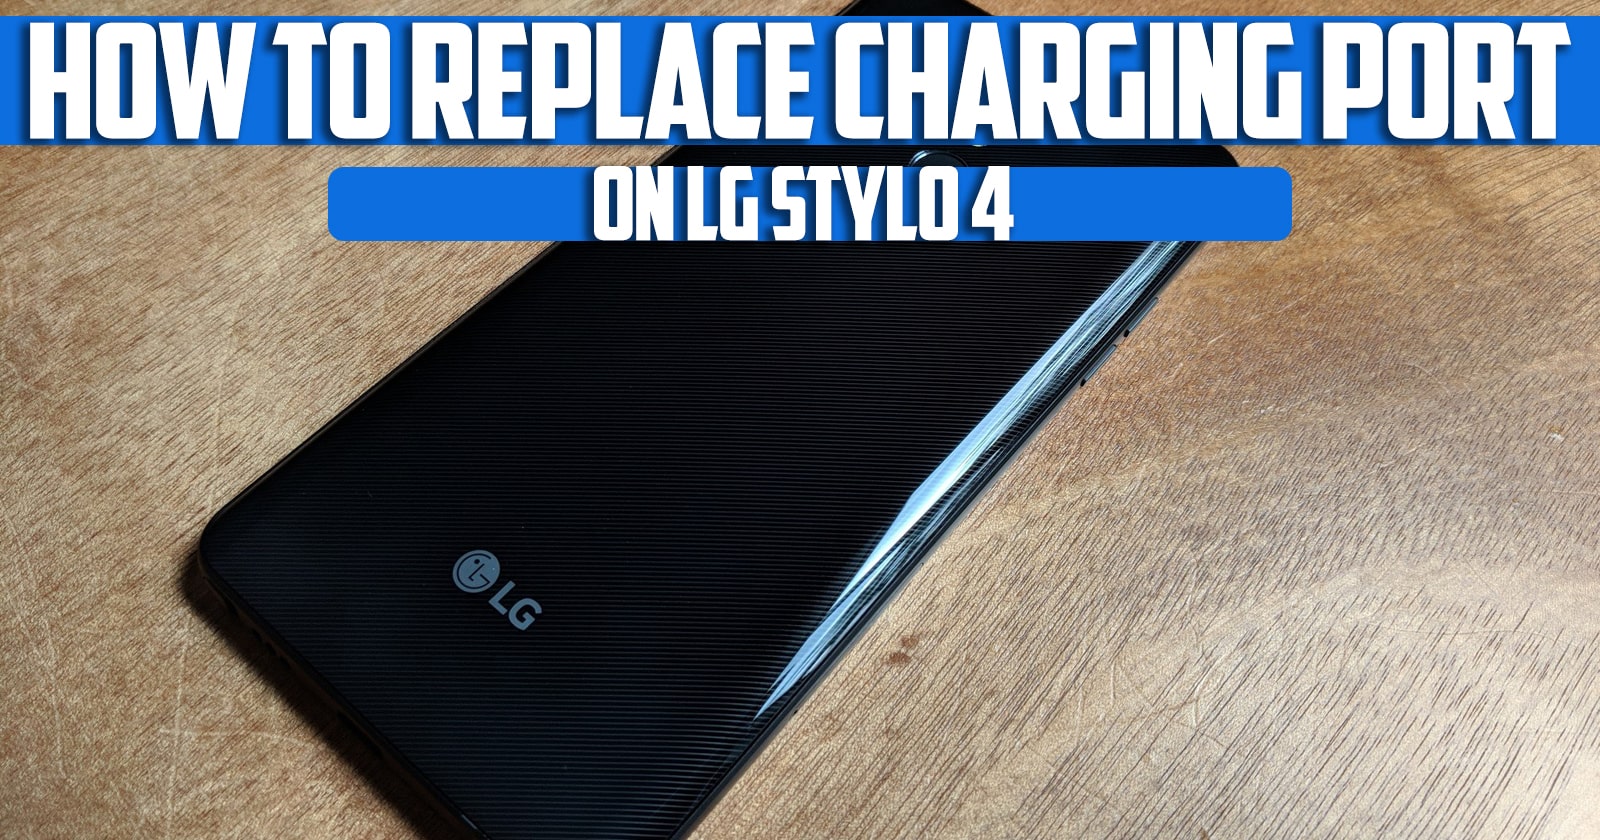 How to Replace Charging Port on LG Stylo 4